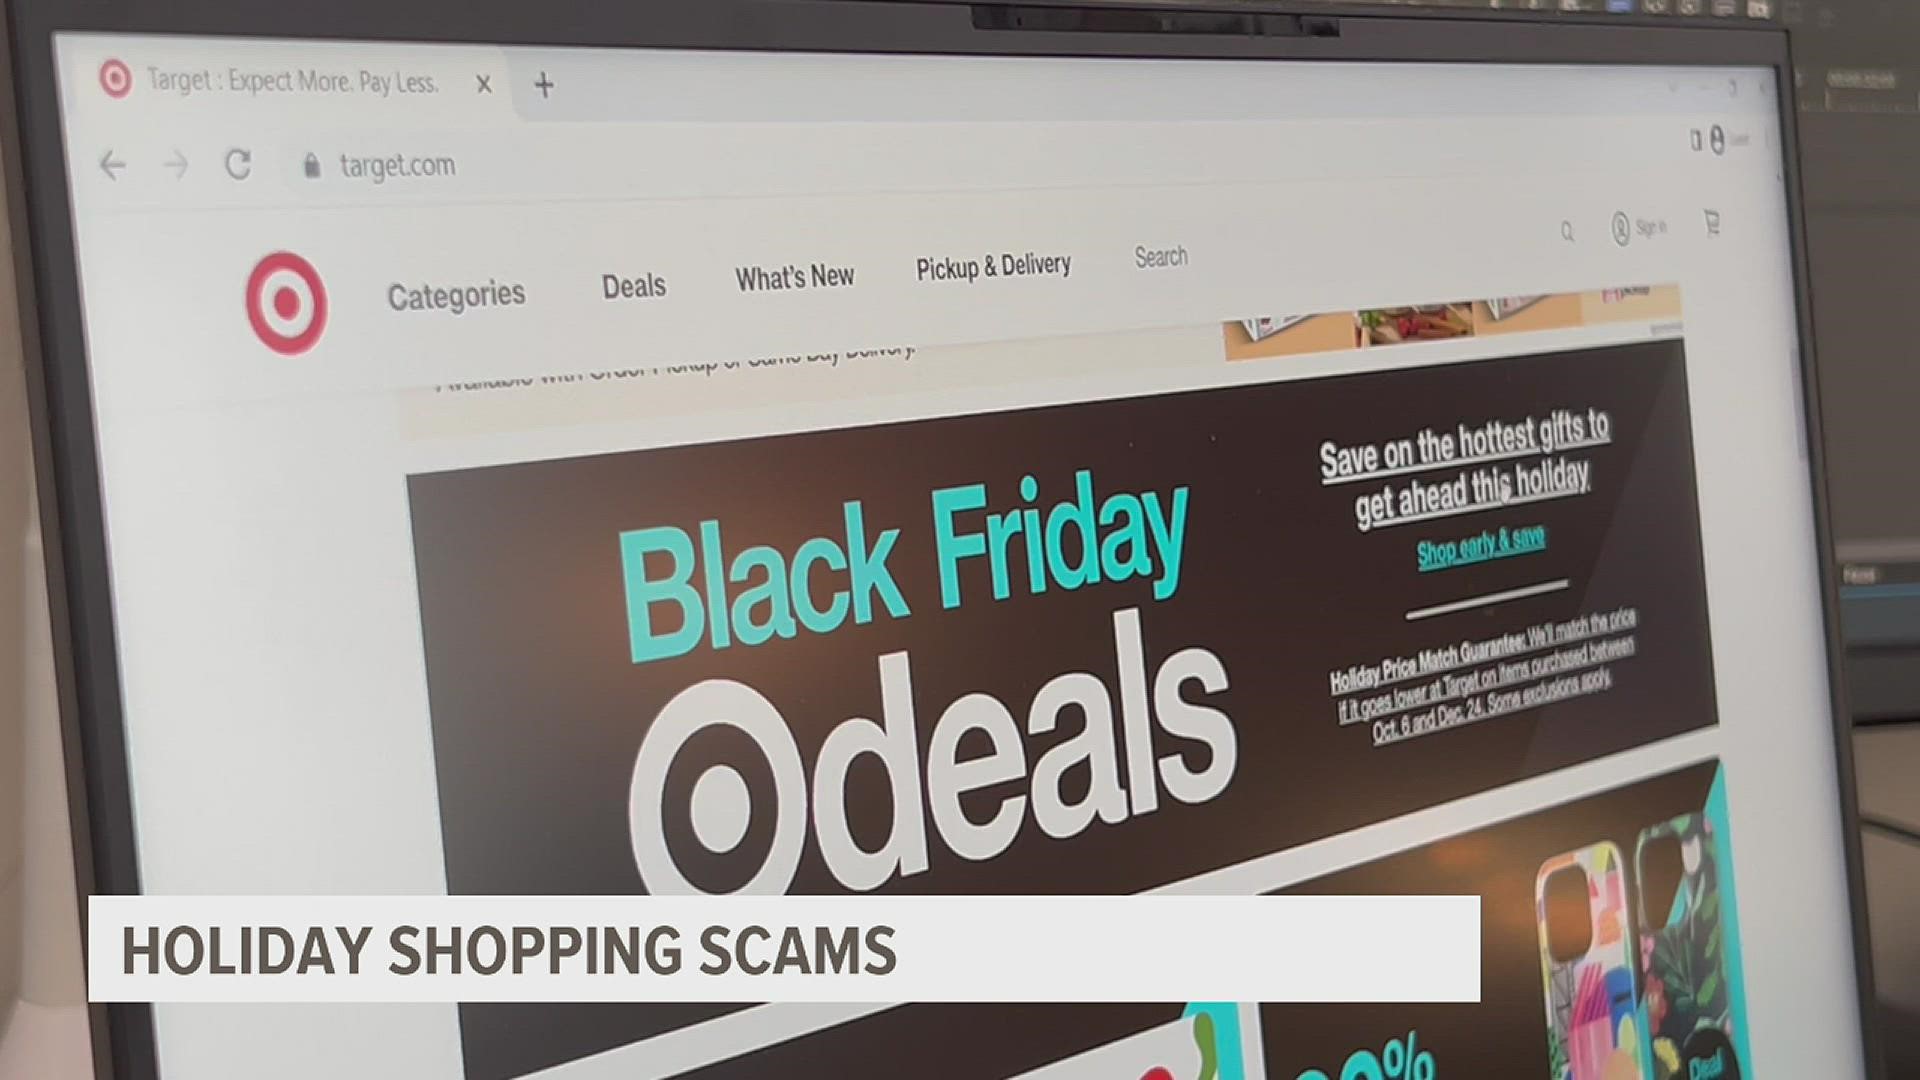 Major retailers are rolling out holiday promotions as millions of Americans begin searching for the perfect gift. One expert is warning online shoppers of scams.